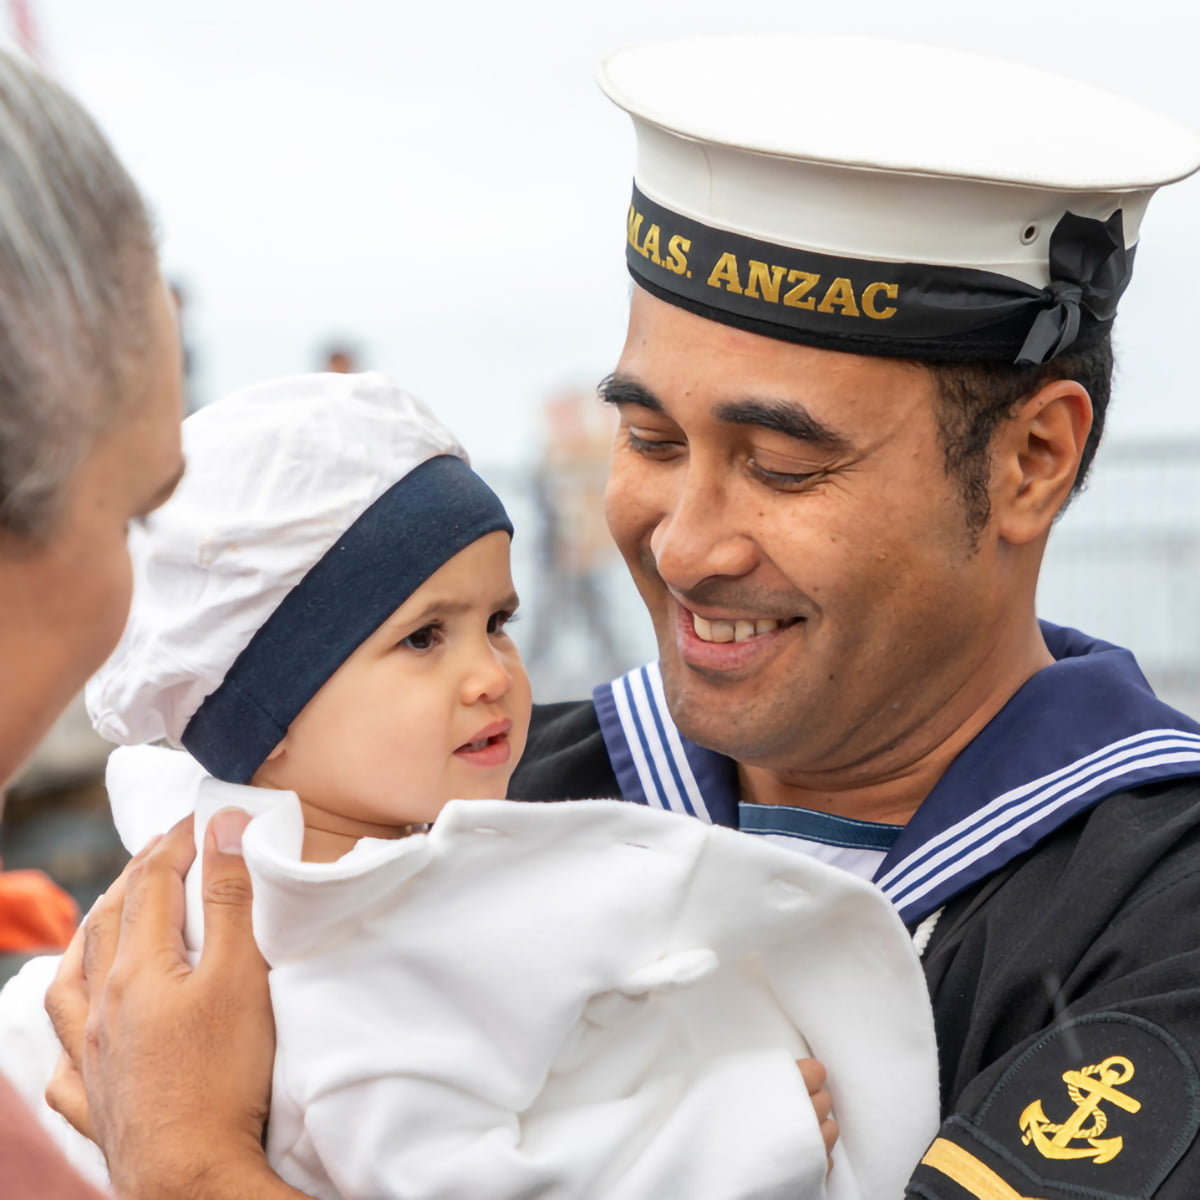 A man in the navy looking happily at his small child.